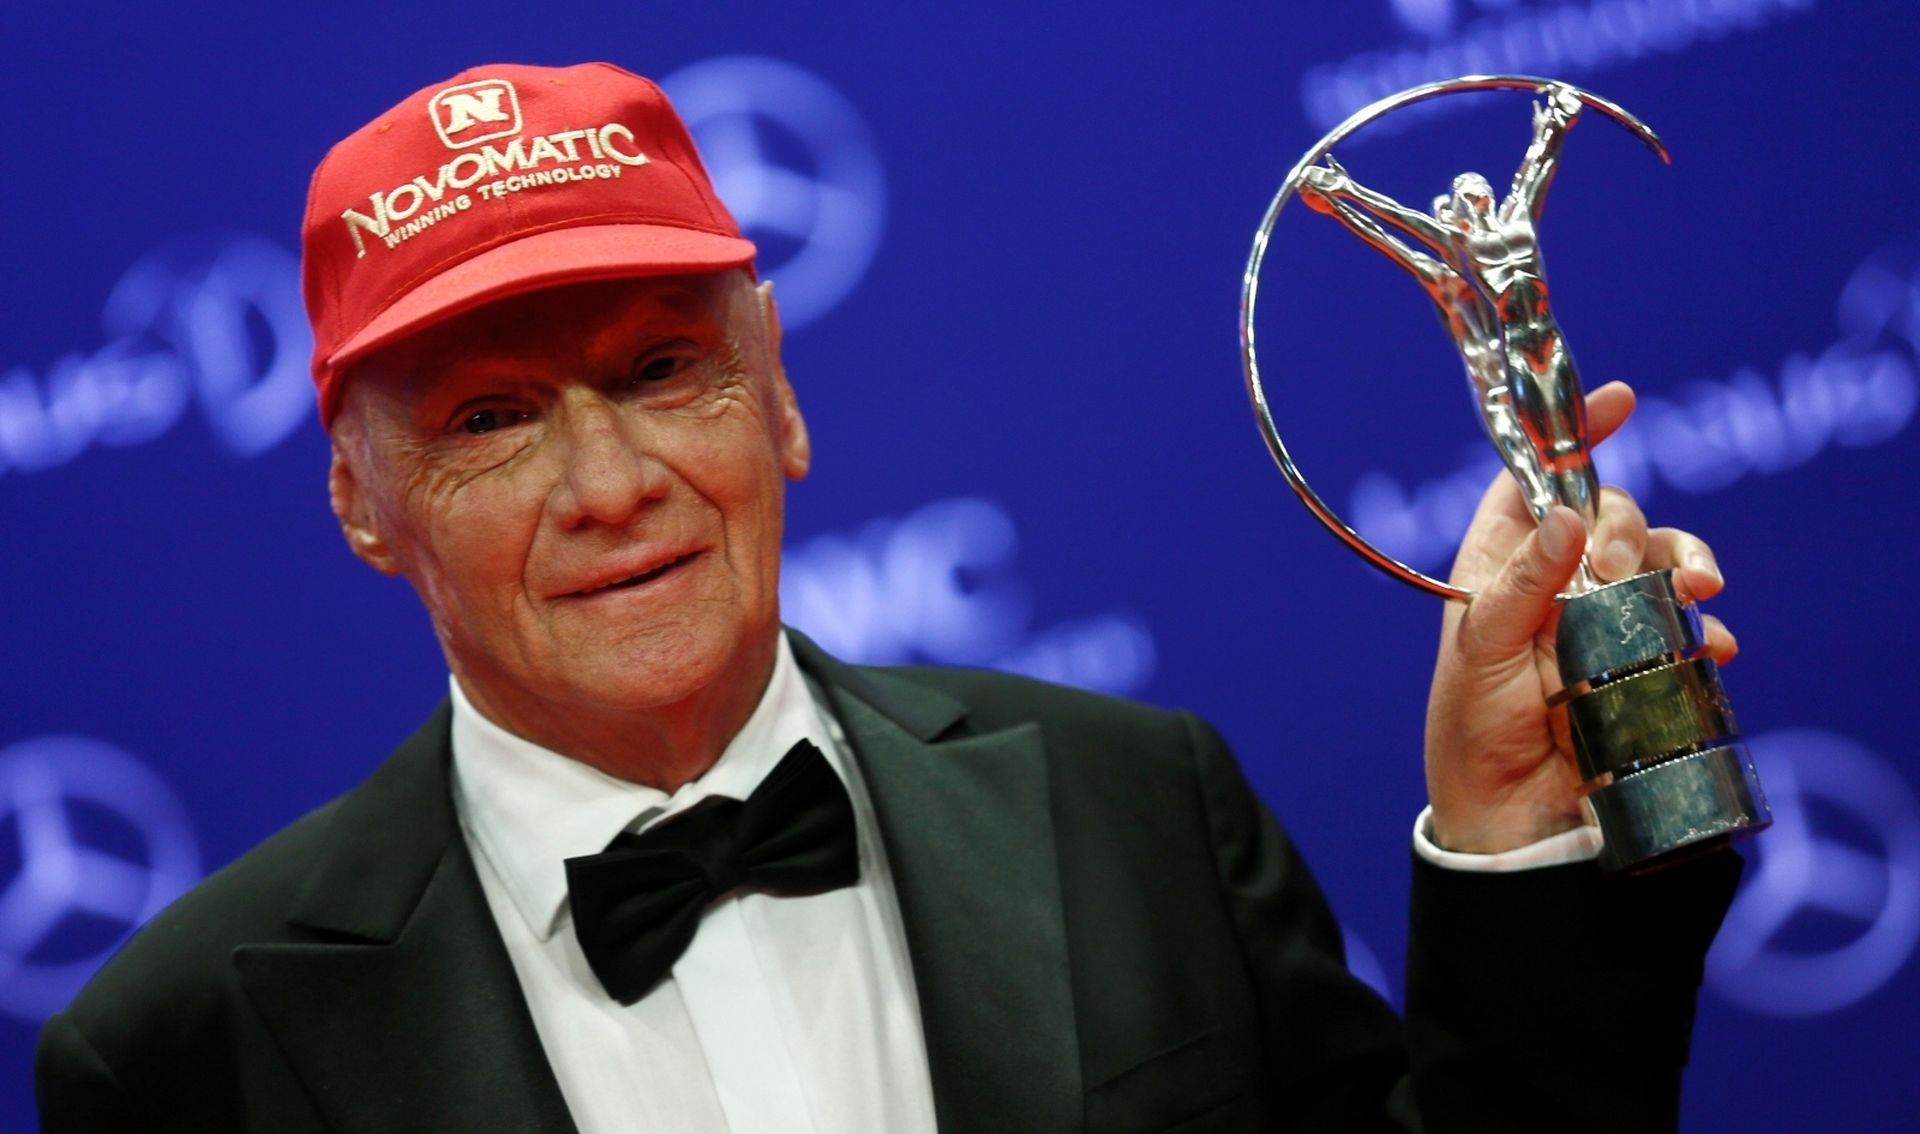 FILE PHOTO:  Former Formula One driver Lauda poses with his Lifetime award during the Laureus World Sports Awards 2016 in Berlin FILE PHOTO:  Former Formula One driver Niki Lauda poses with his Lifetime award during the Laureus World Sports Awards 2016 in Berlin, Germany, April 18, 2016.  REUTERS/Hannibal Hanschke /File Photo Hannibal Hanschke